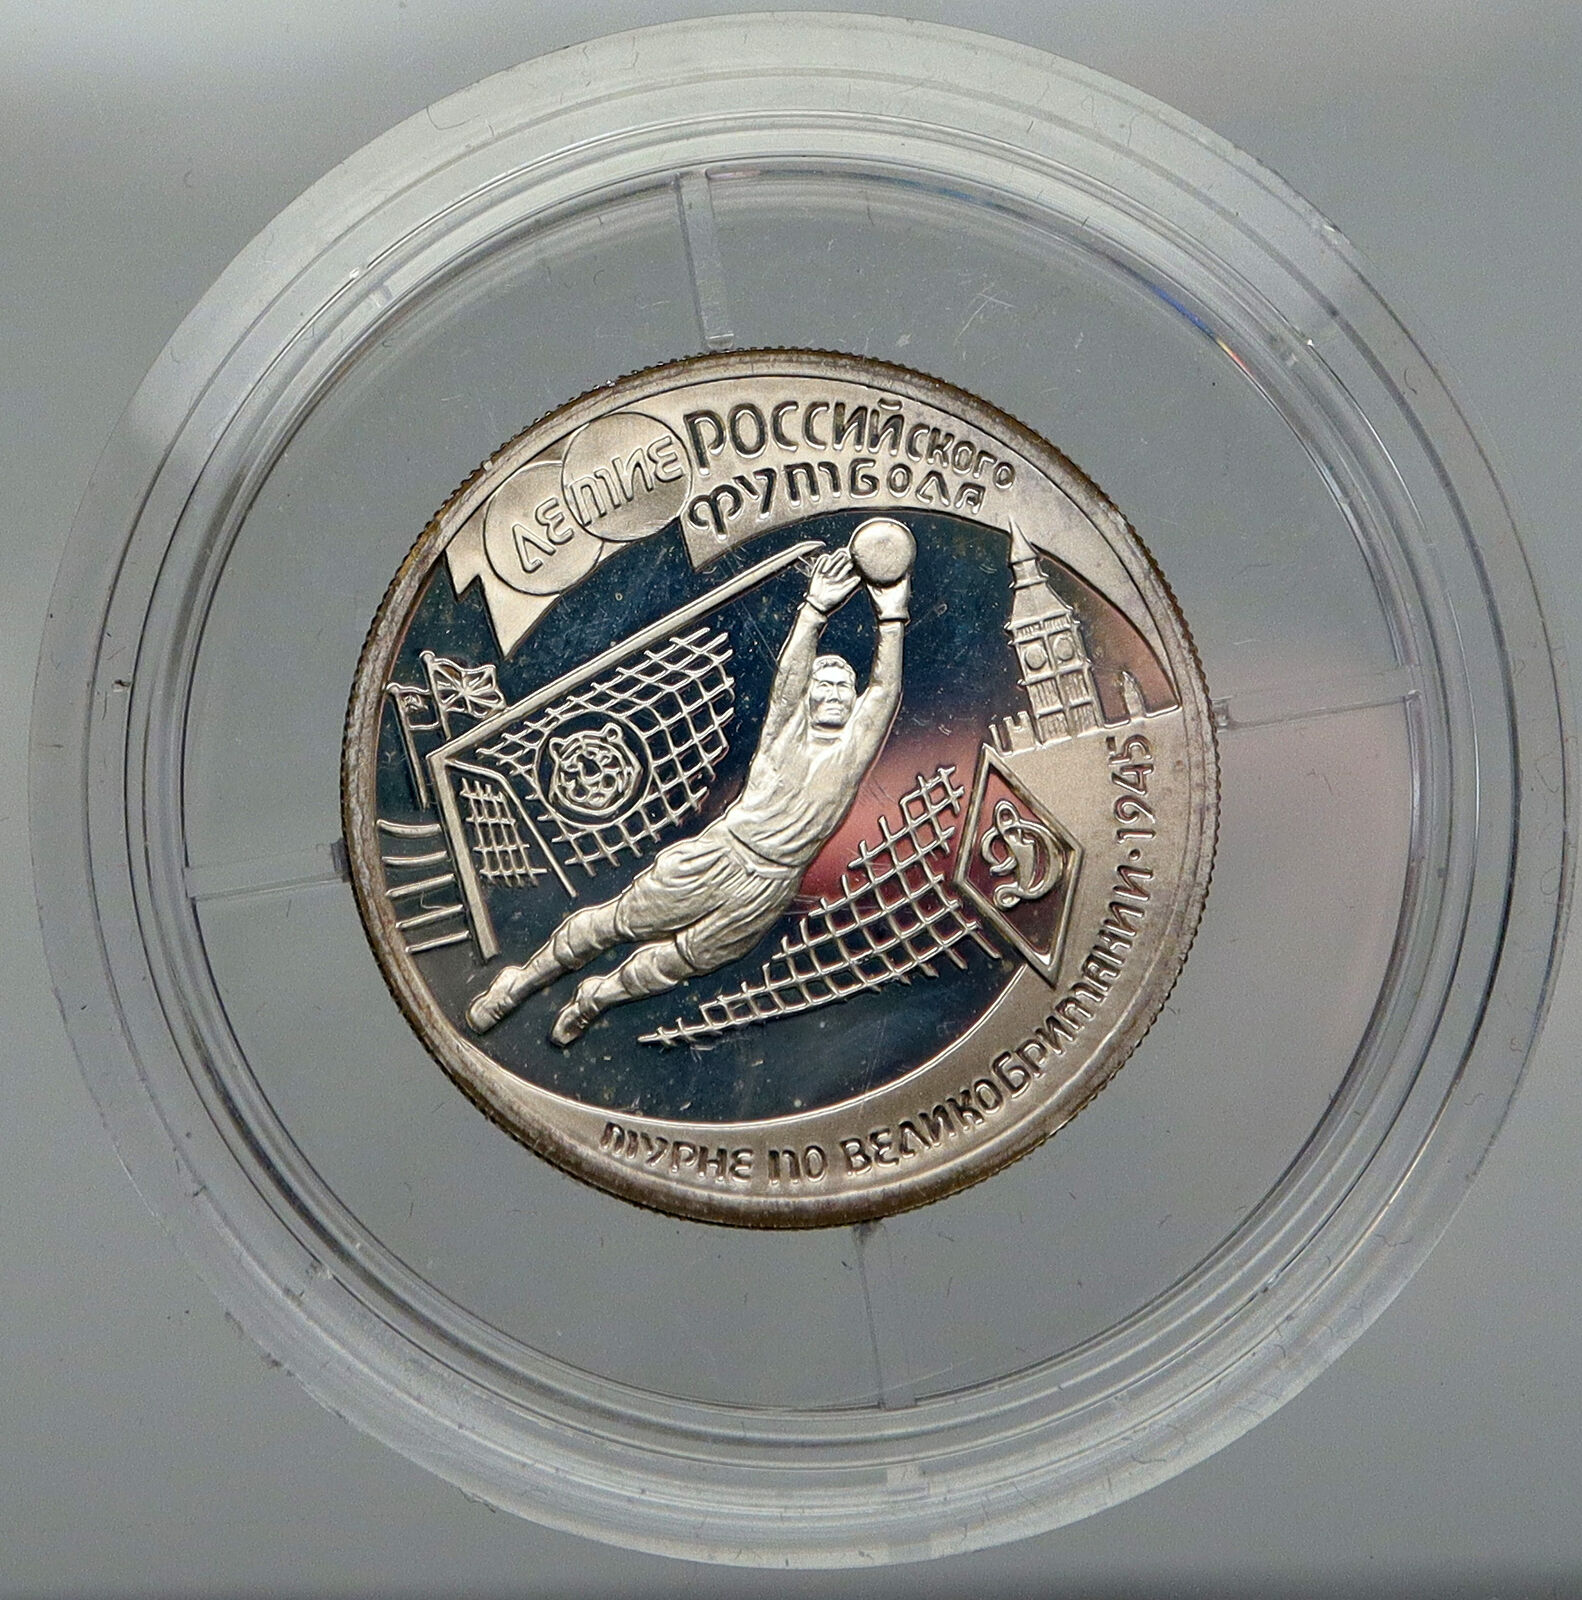 1997 RUSSIA Soccer Football CENTENNIAL Vintage Proof Silver Ruble Coin i92949